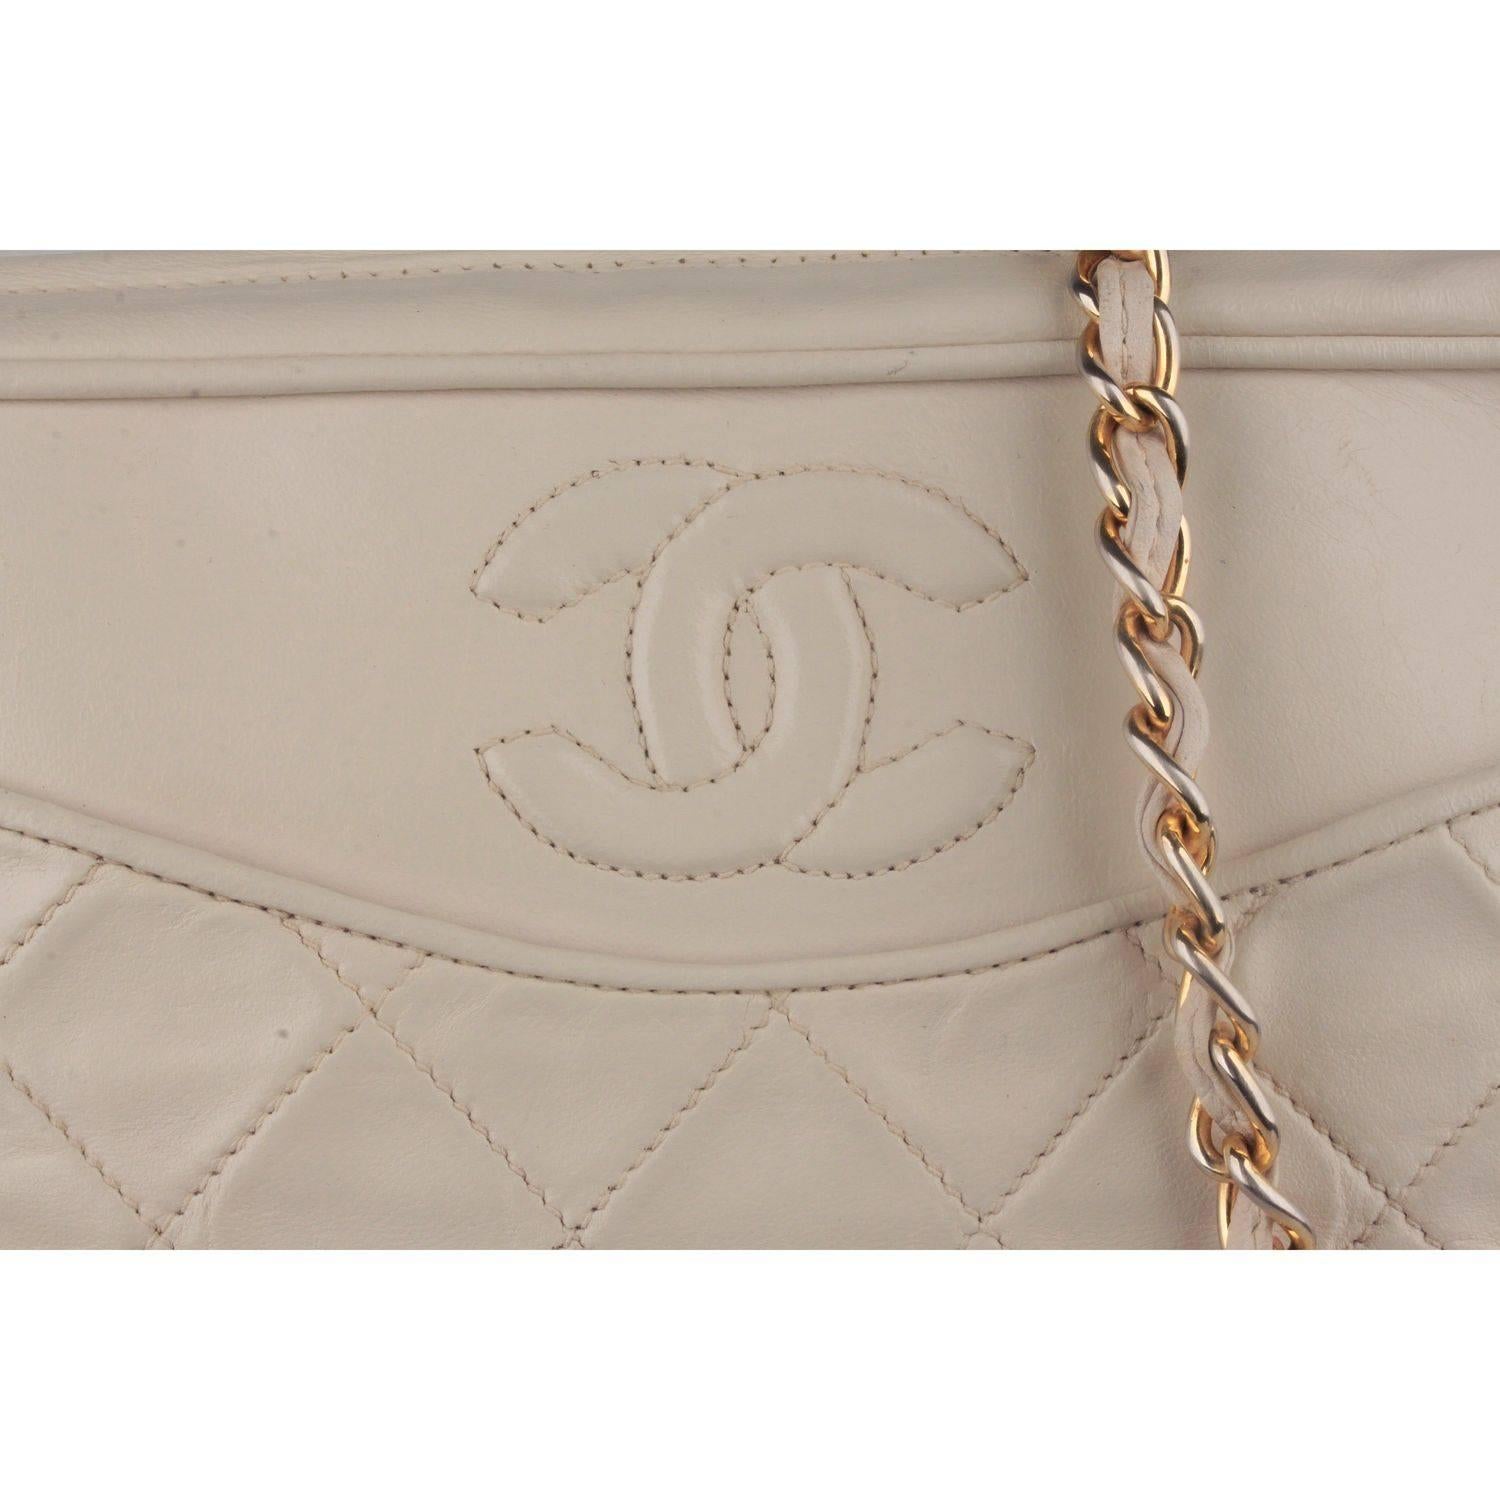 CHANEL Vintage Ivory QUILTED Leather CC Stitch CAMERA BAG w/ Tassel im Zustand „Gut“ in Rome, Rome